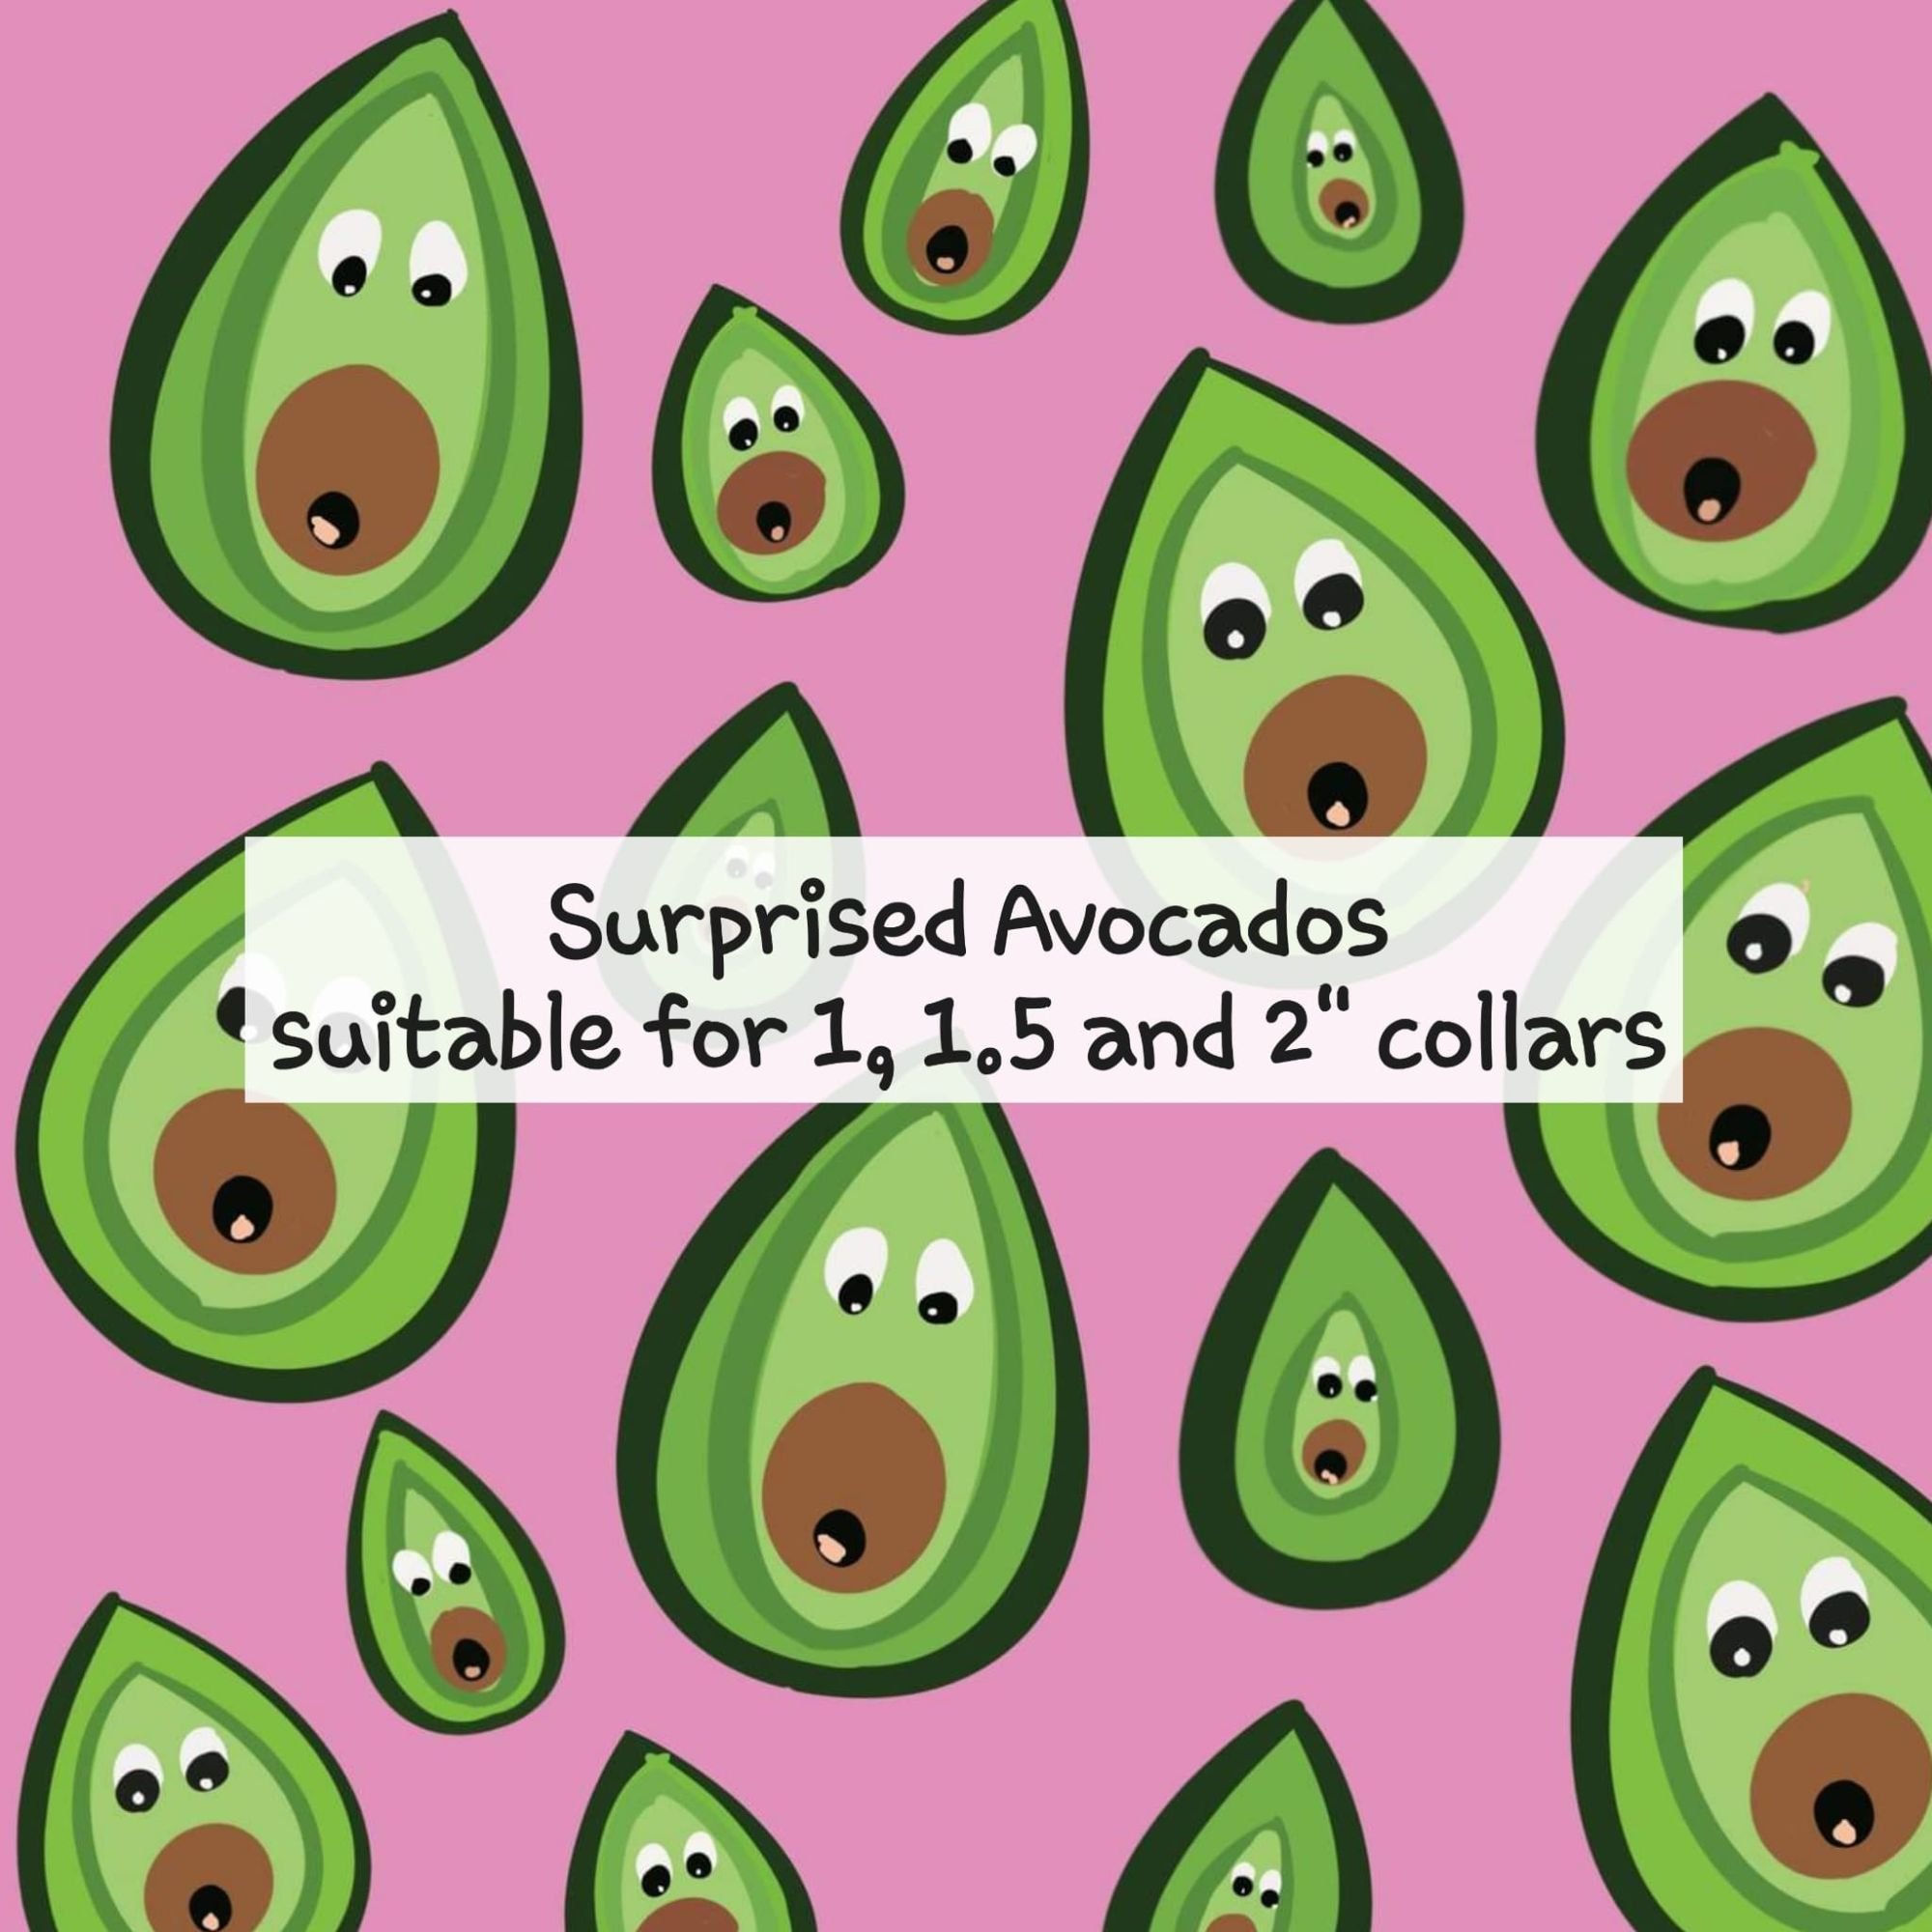 Surprised Avocados - Suitable for 1, 1.5 and 2 inch collars